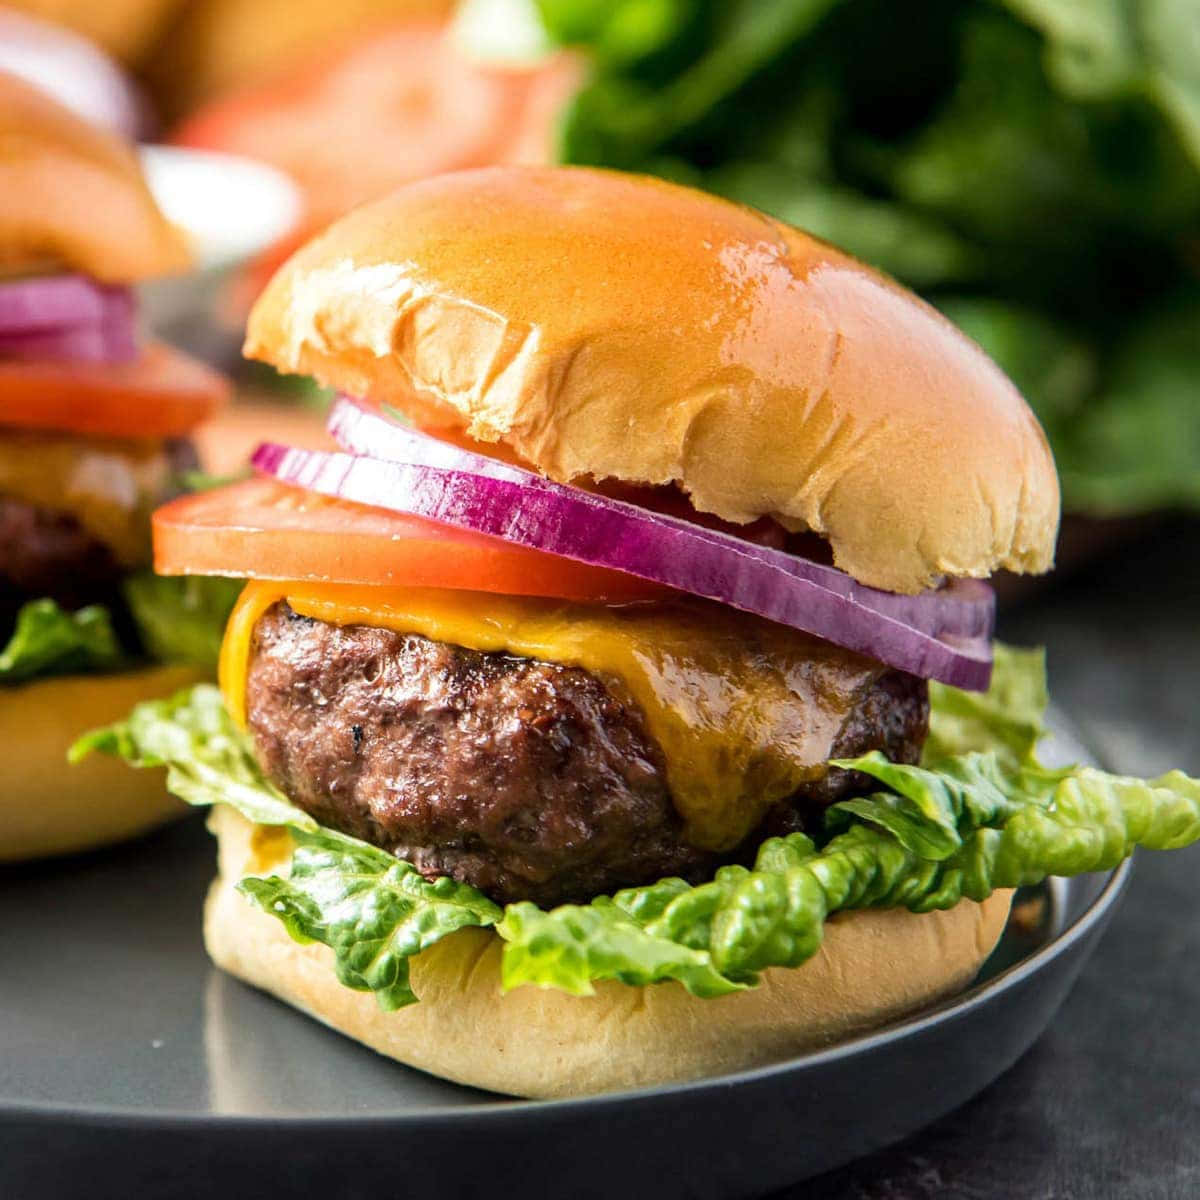 Tasty Hamburger: A Delicious Treat for Your Summer Barbeque